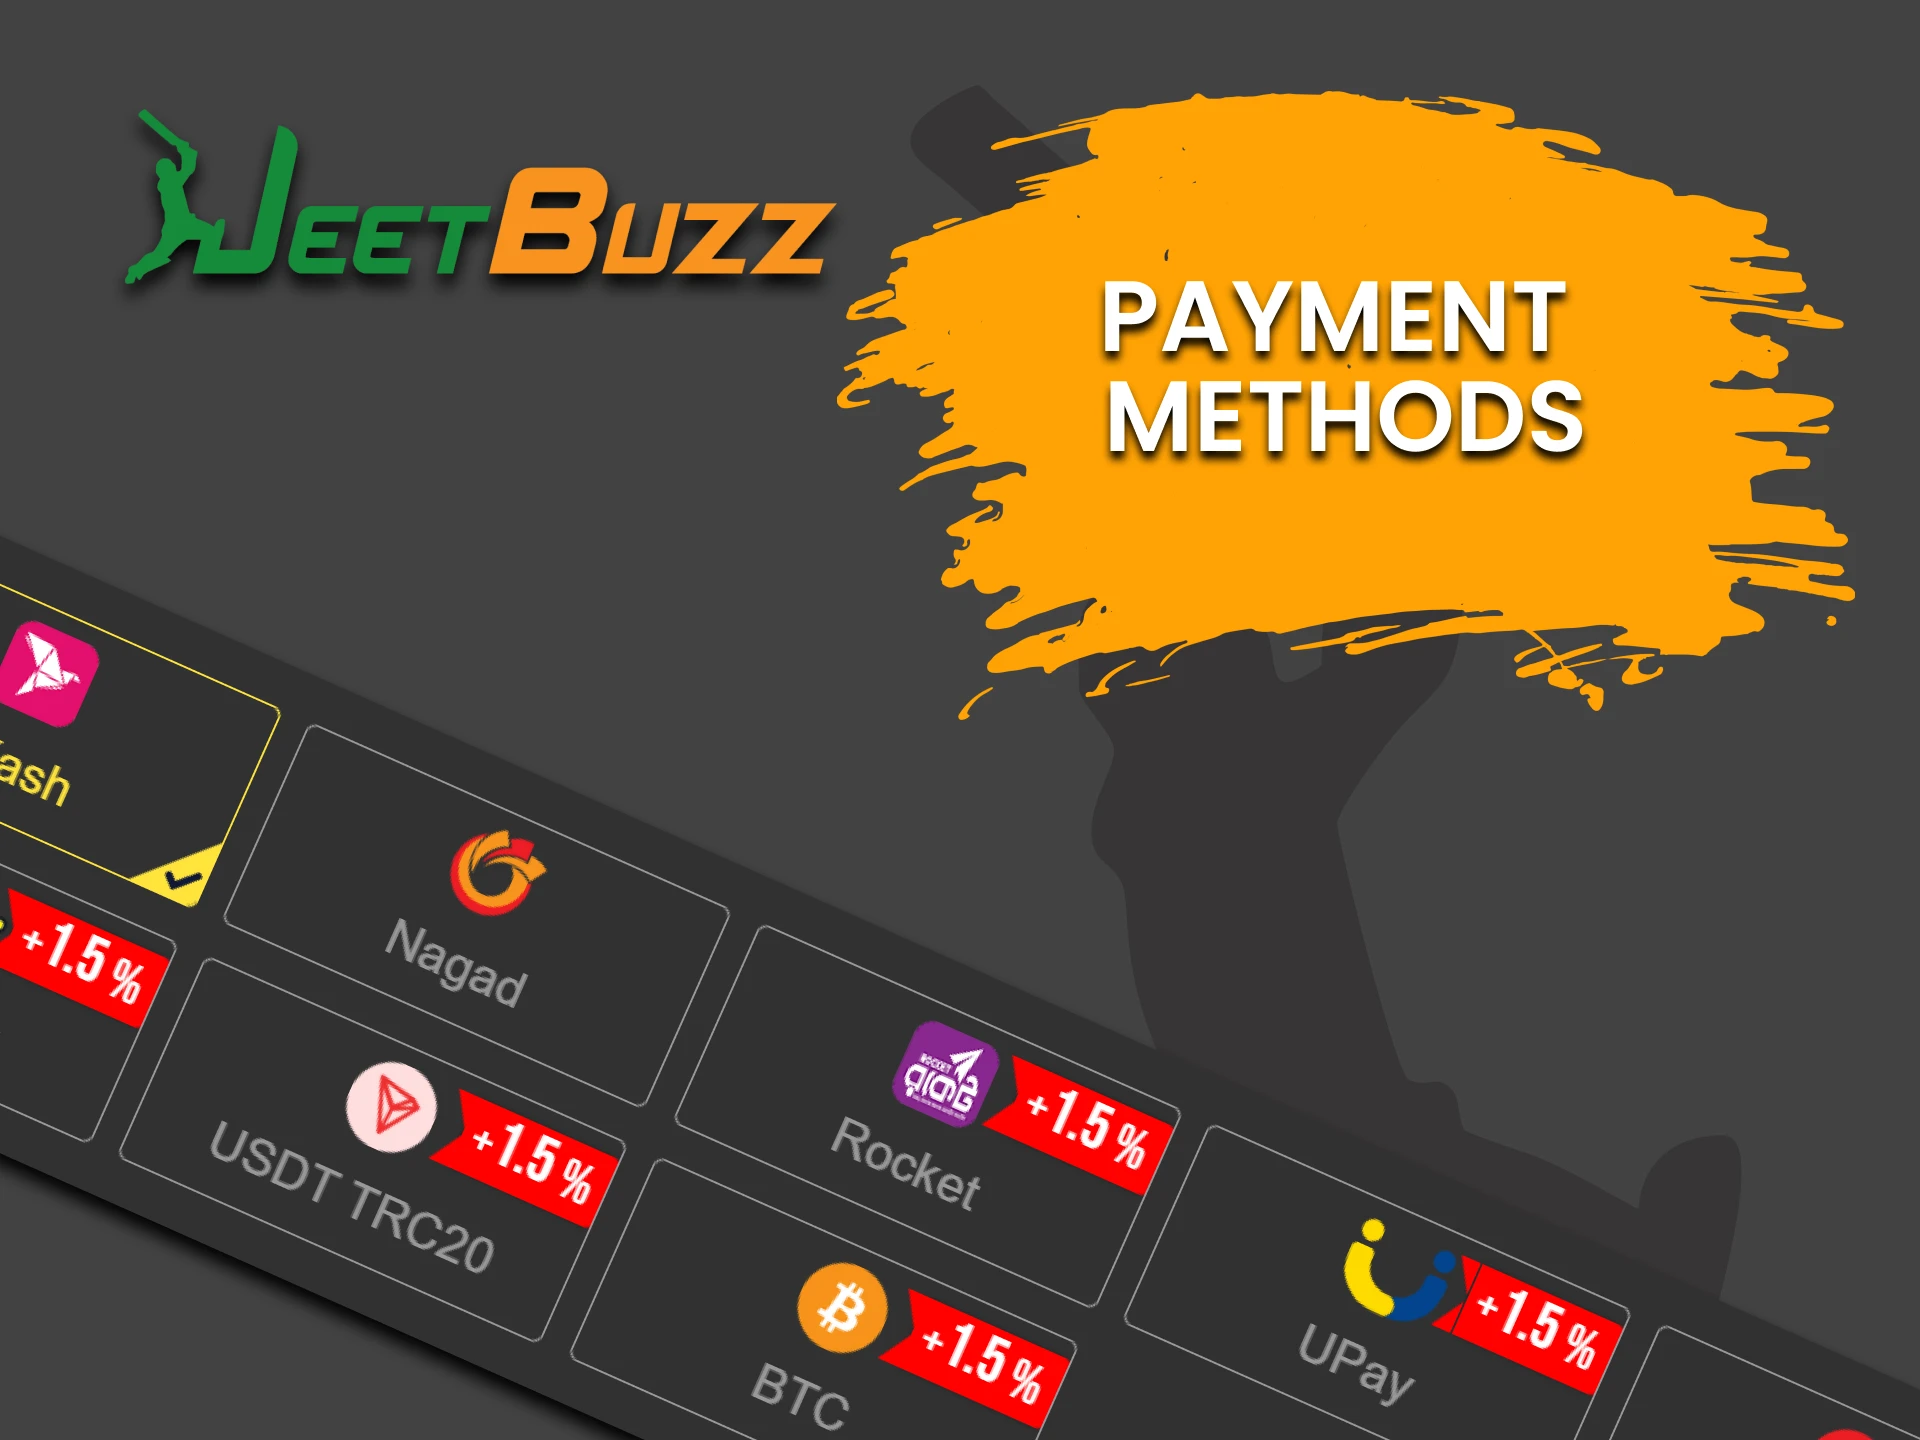 Learn about the types of transactions for the JeetBuzz VIP Club.